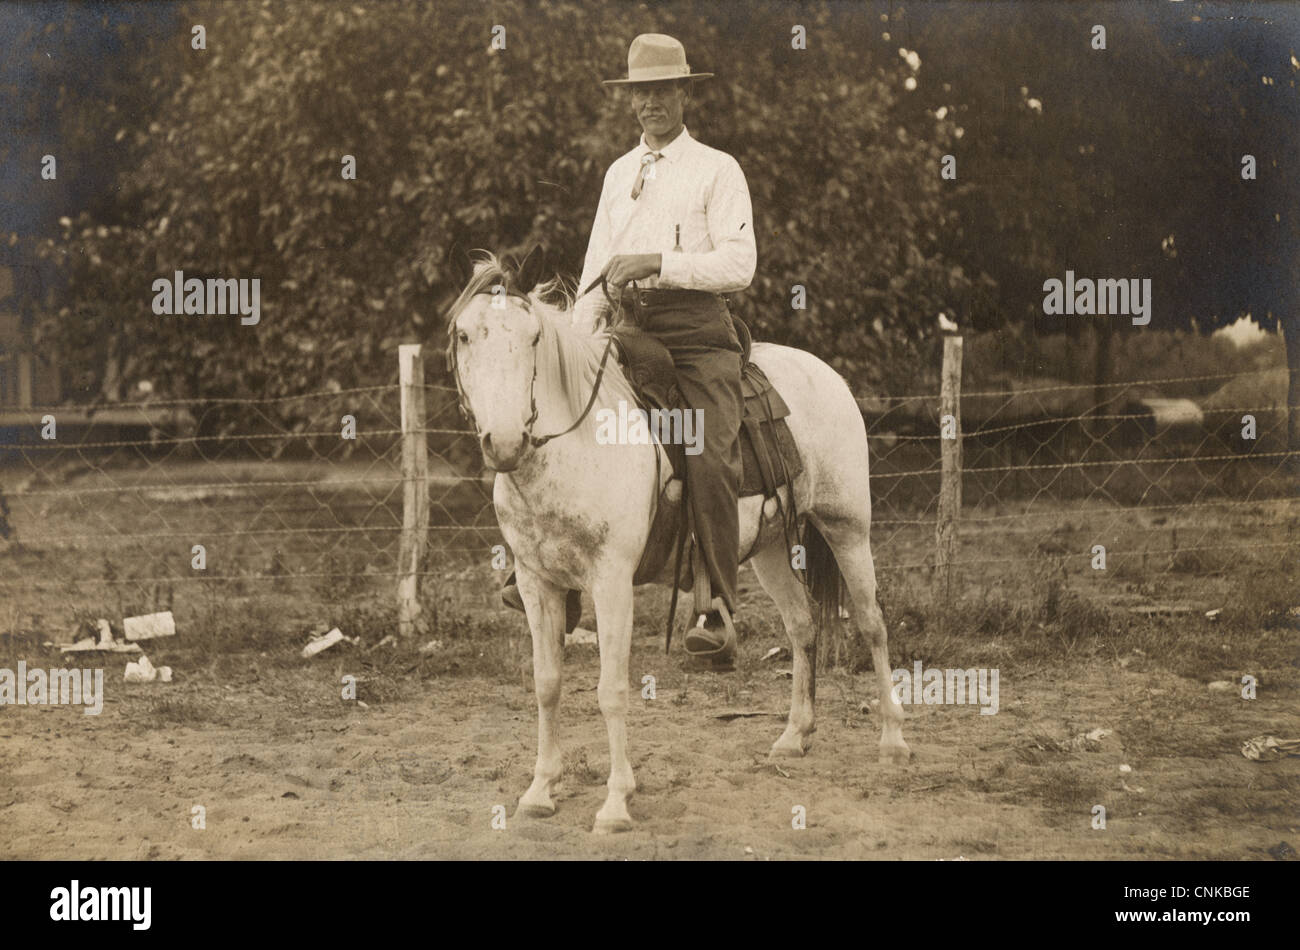 Distinguished Tall Man Riding a White Horse Stock Photo